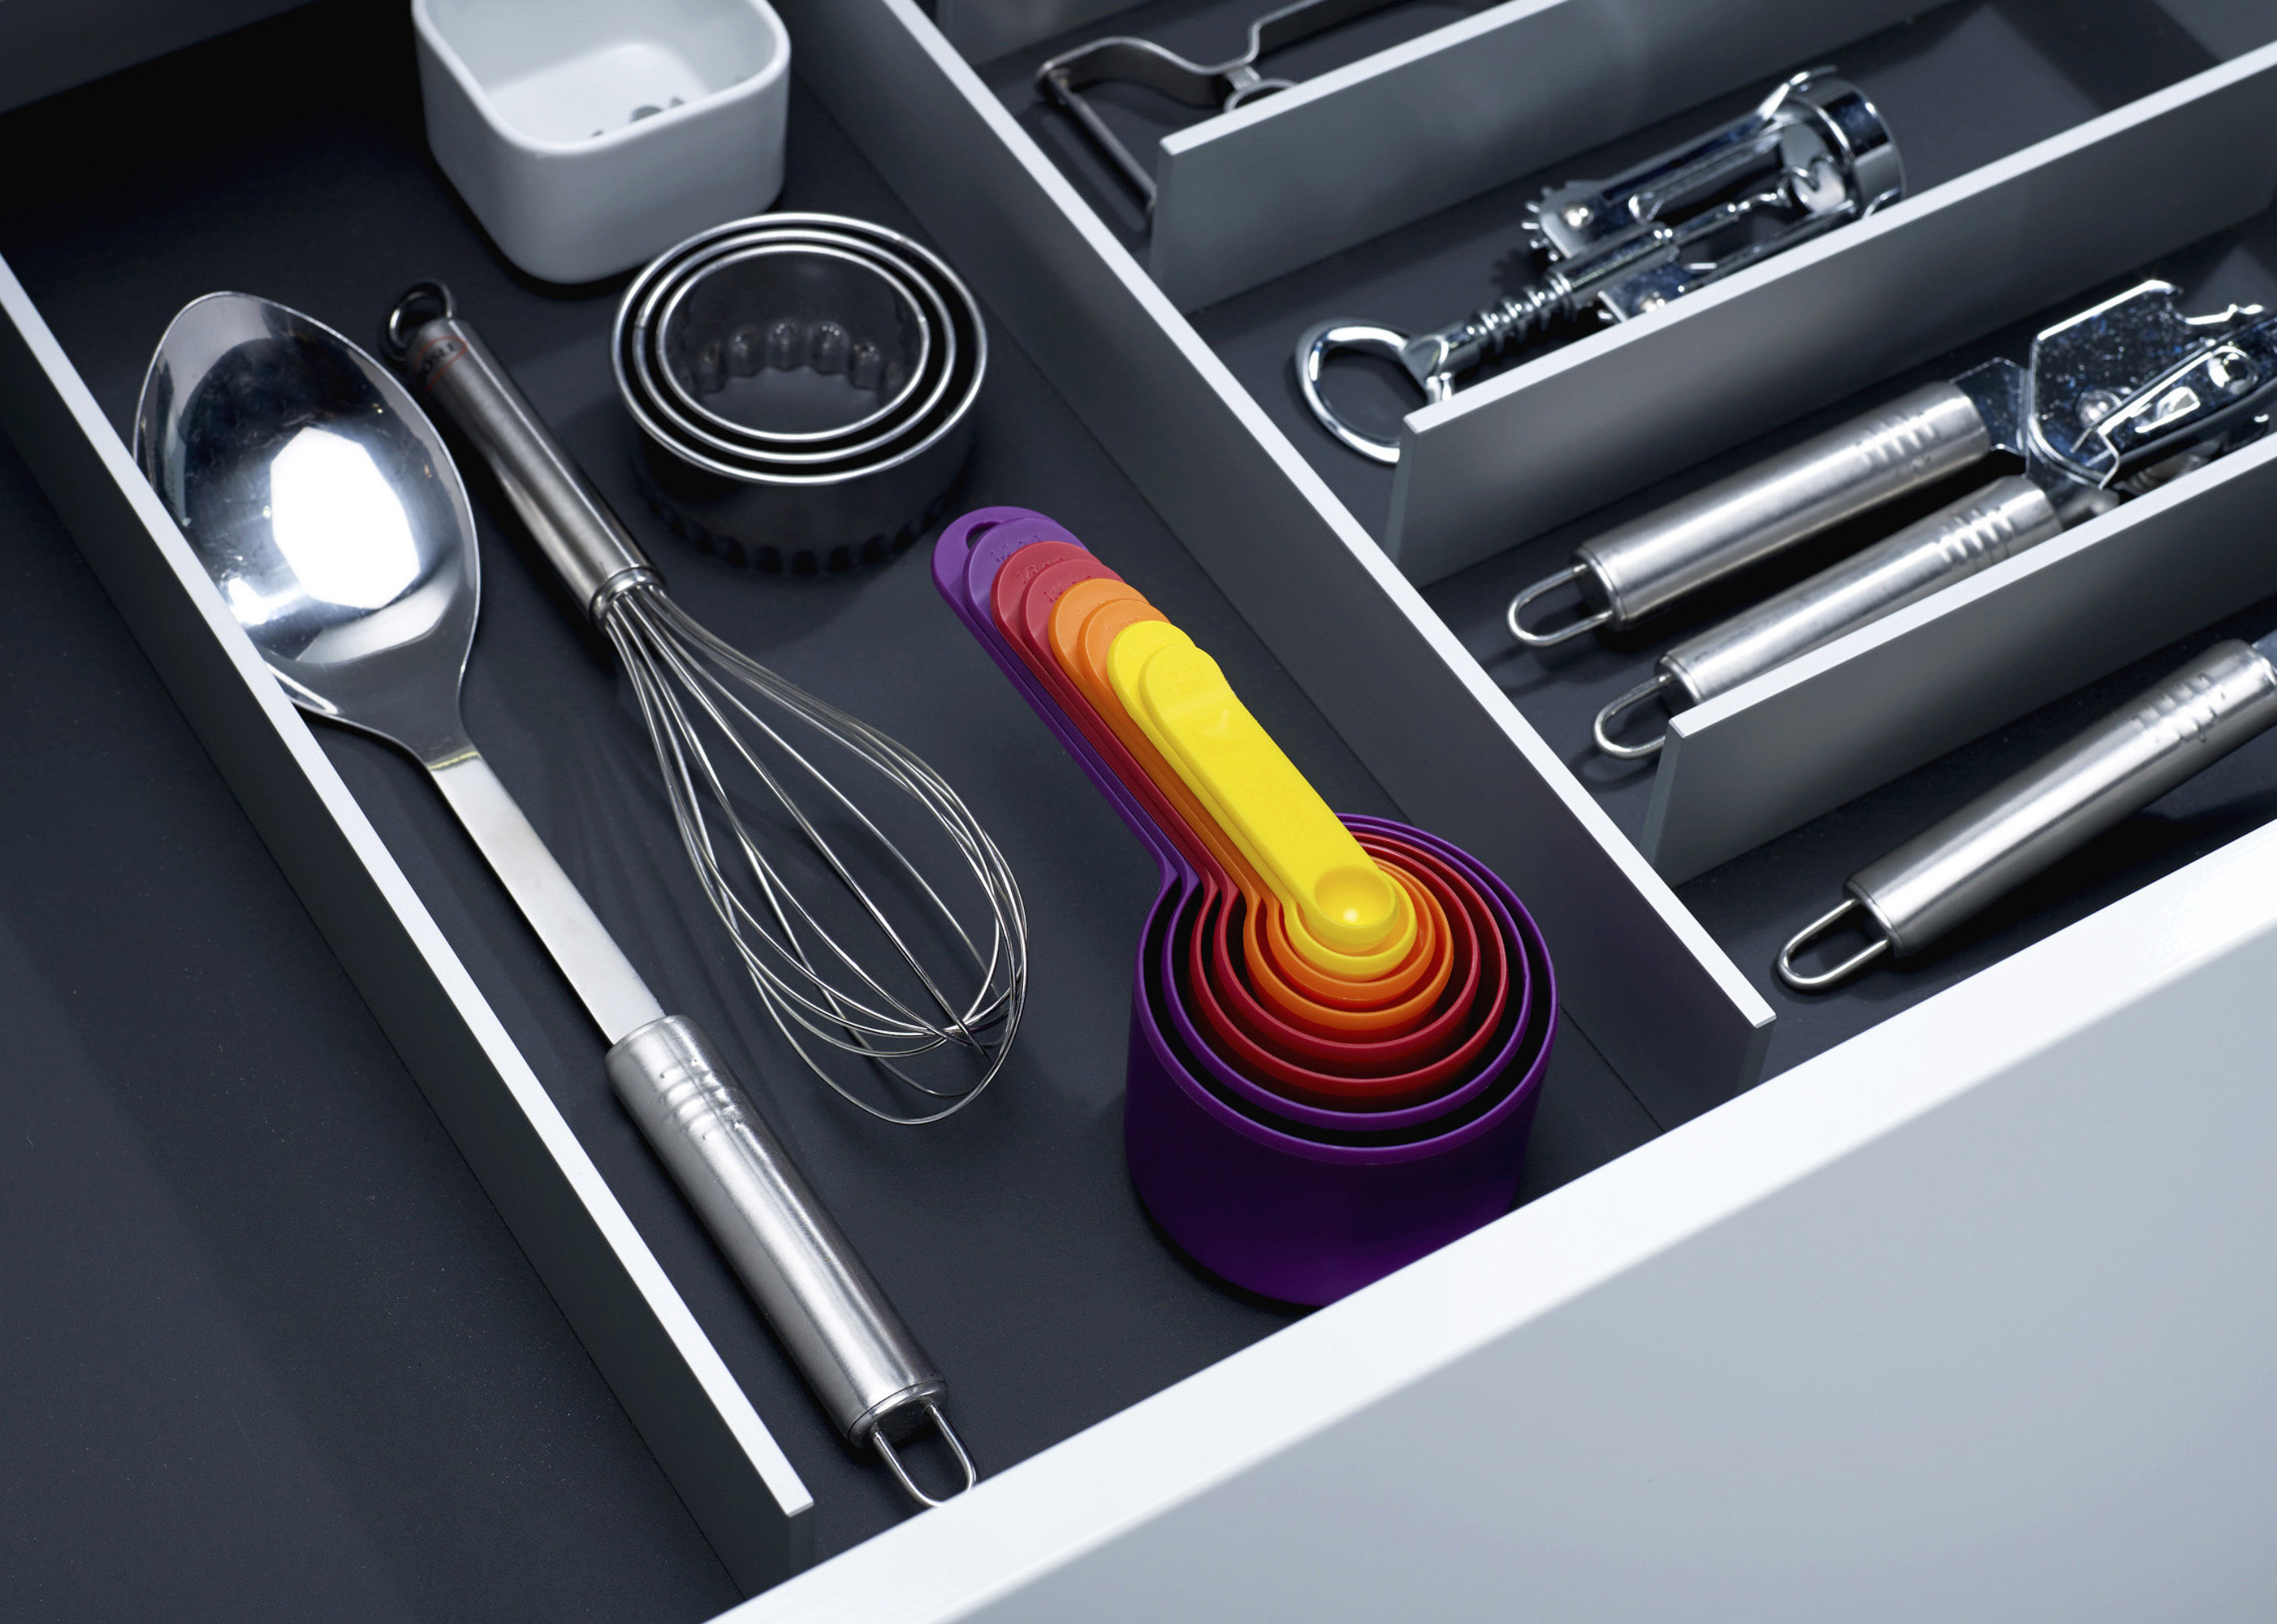 The colorful cup set in a drawer with cutlery